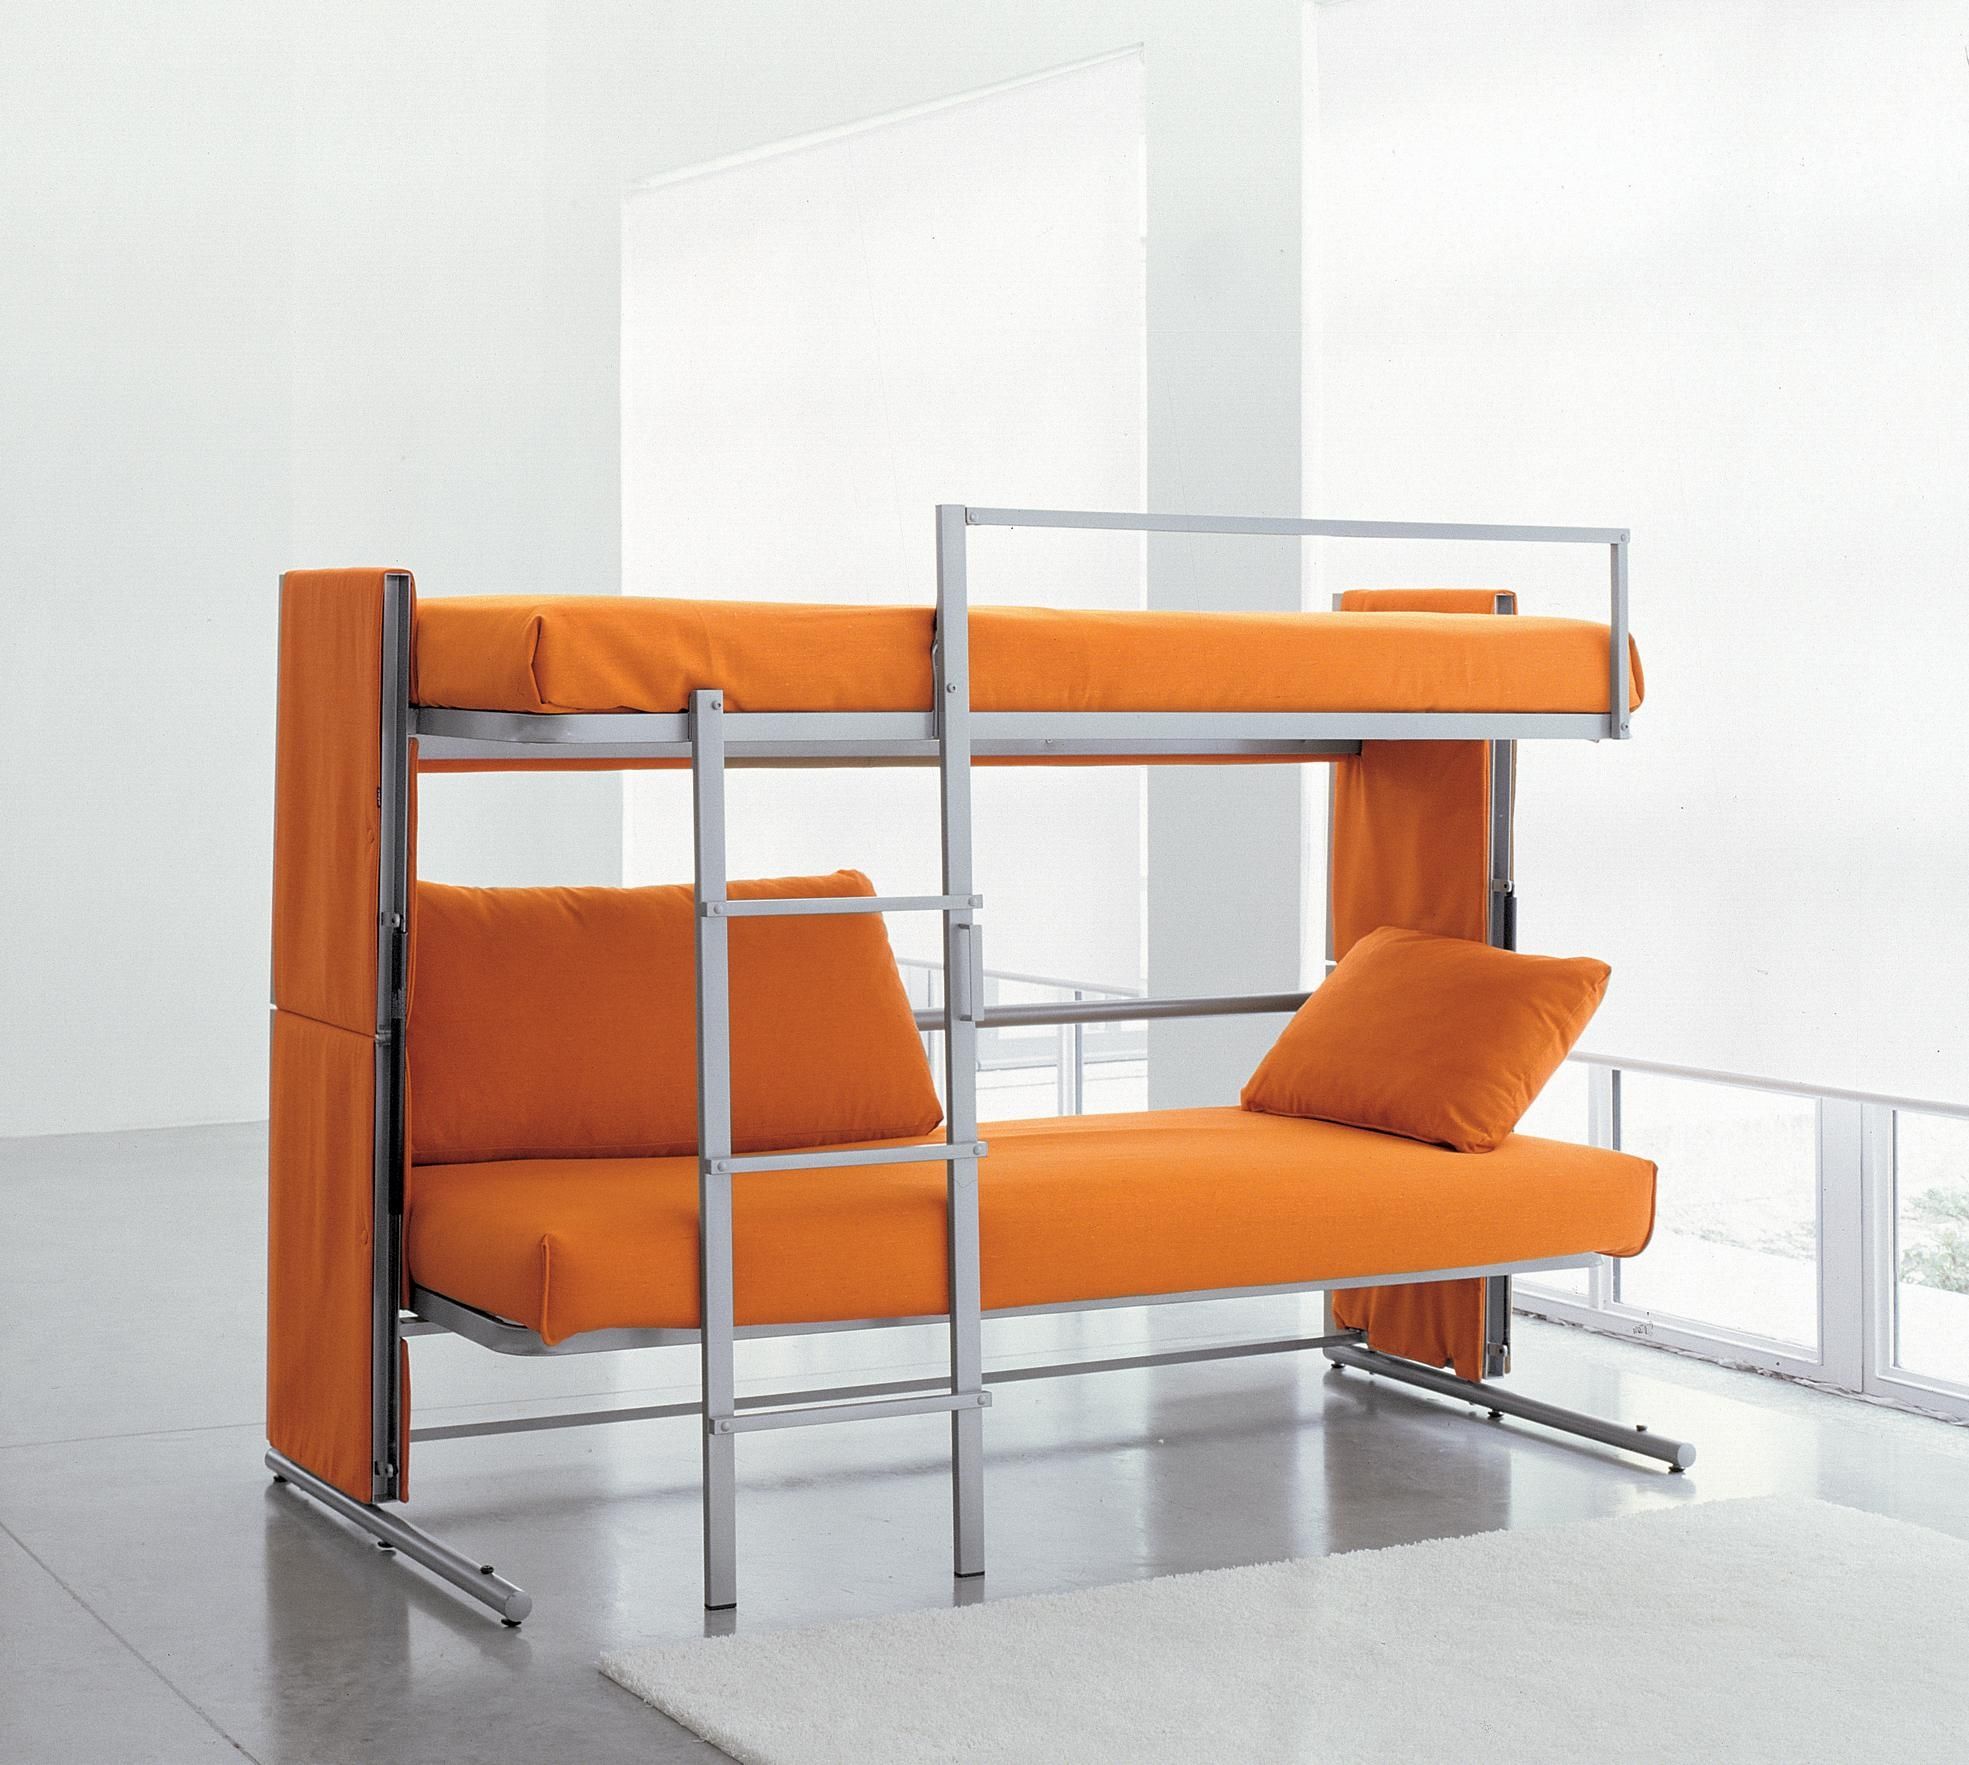 Doc A Sofa Bed That Converts In To A Bunk Bed In Two Secounds Intended For Sofa Bunk Beds (View 1 of 20)